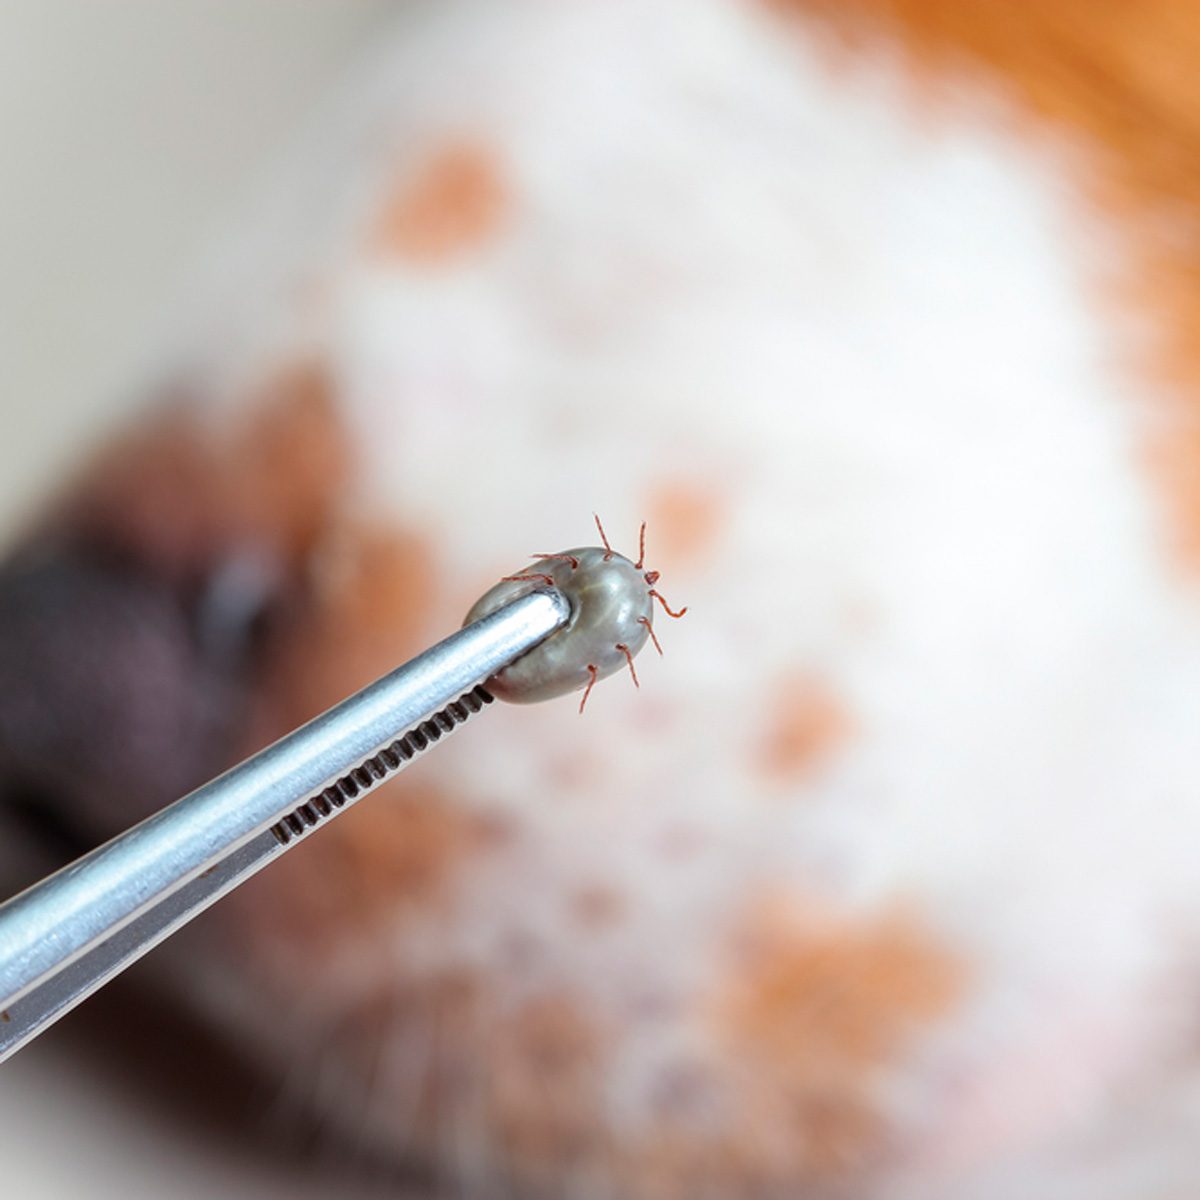 What To Do When You Find A Tick In Your House | Family Handyman